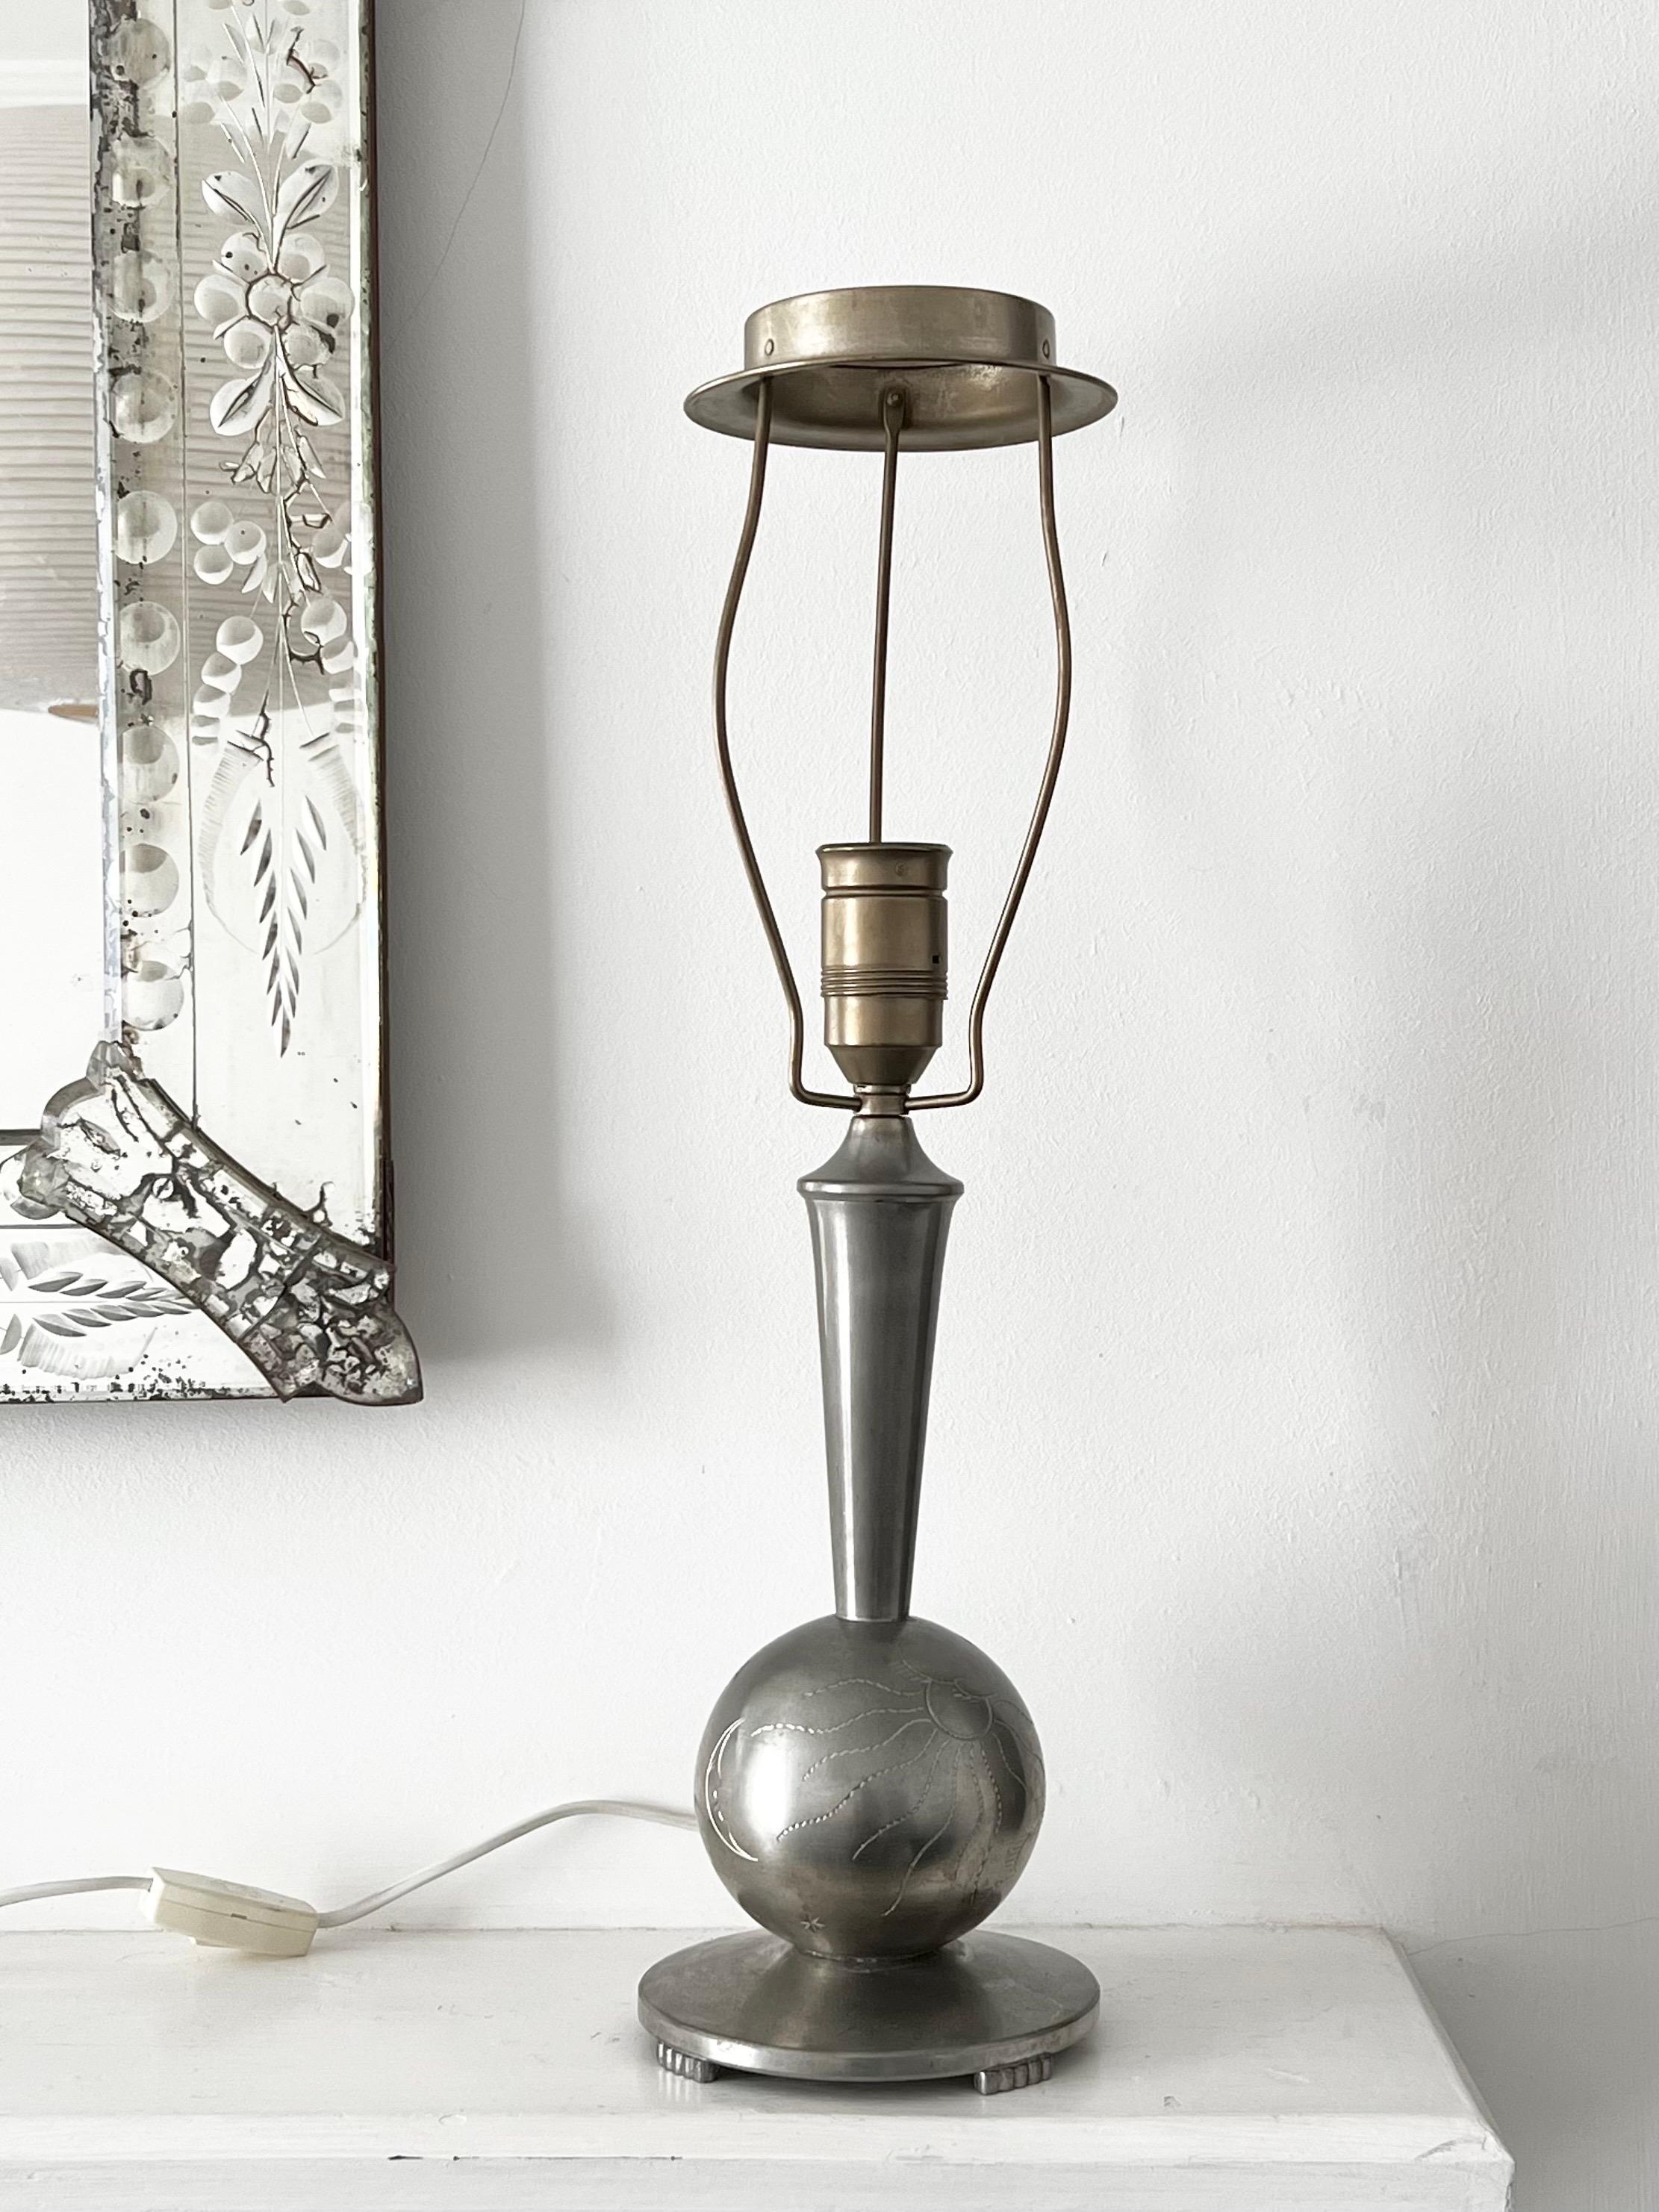 A pretty table lamp of white metal (pewter or tin) made in Sweden, 1930s. Swedish Grace, or Art Deco style. 

The design features a circular base raised on four feet, and central ball with engravings depicting the sun, moon, Saturn and lightning.